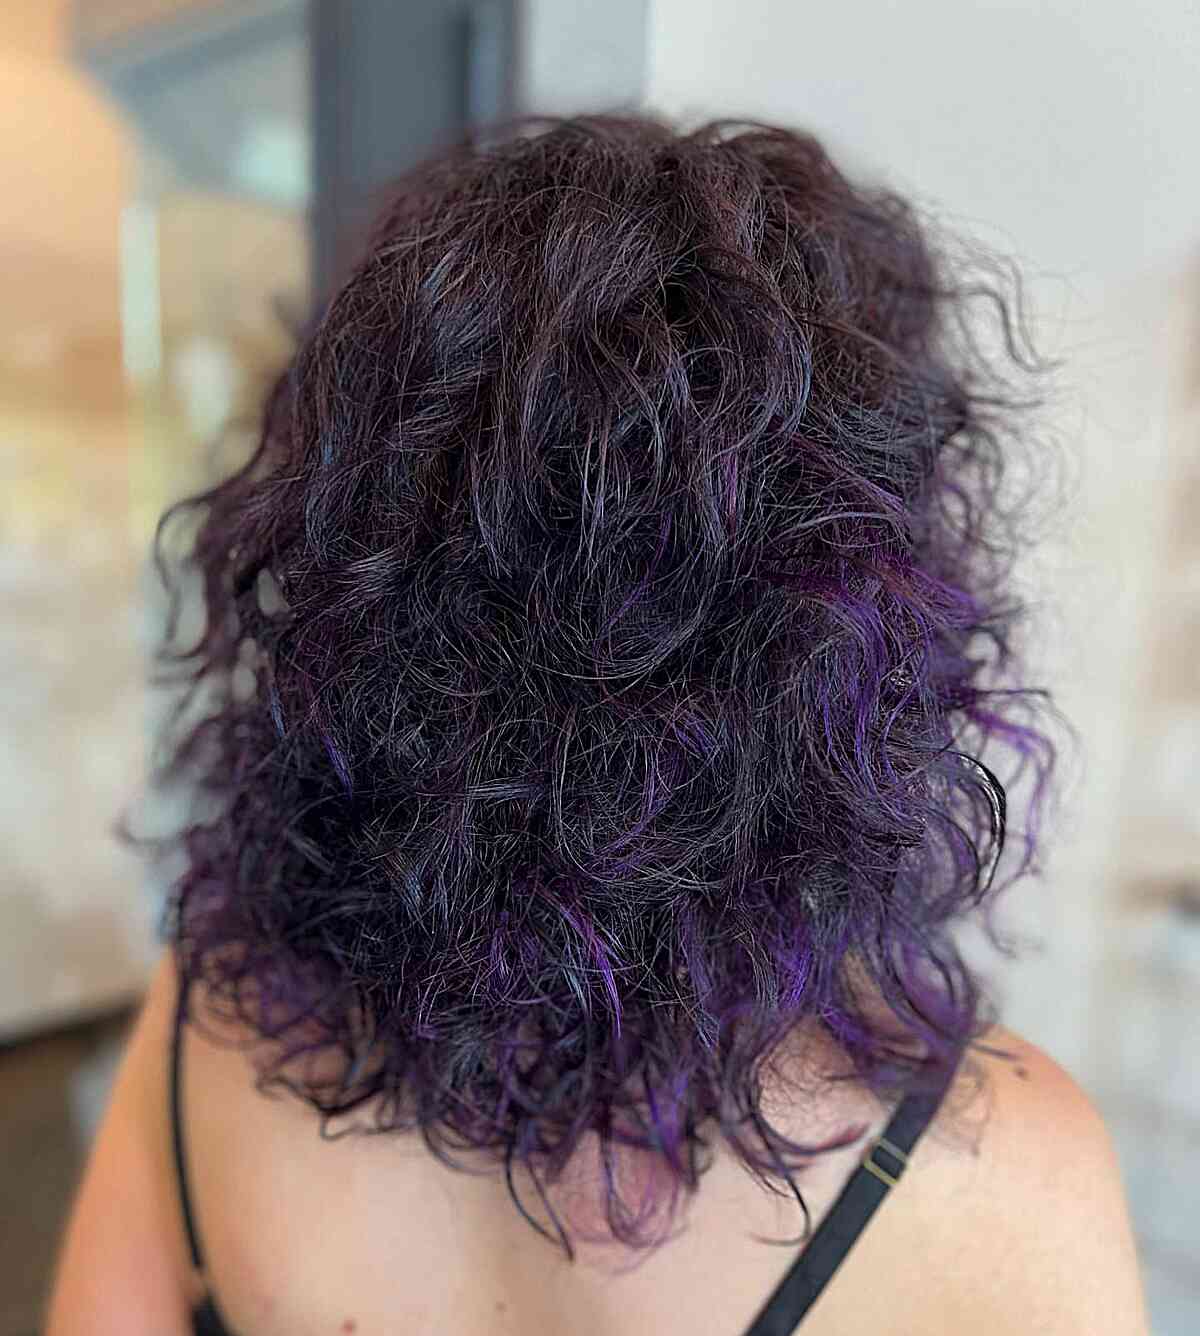 Midnight Purple Accents for Mid-Length Textured Curly Hair